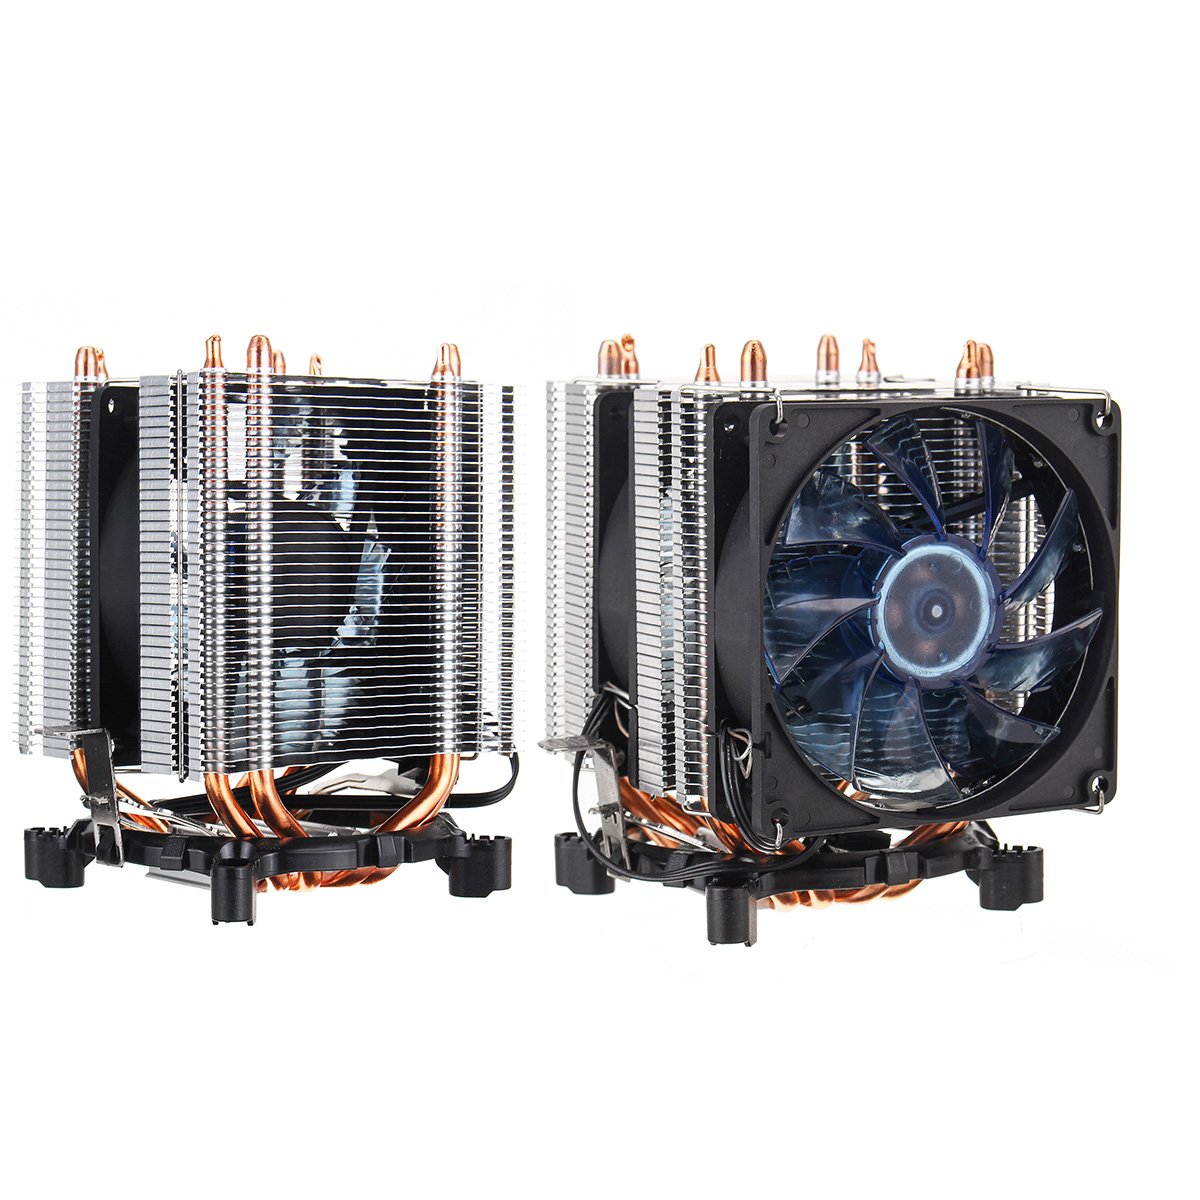 3 Pin Four Copper Pipes Blue Backlit CPU Cooling Fan For AMD For Intel 1155 1156